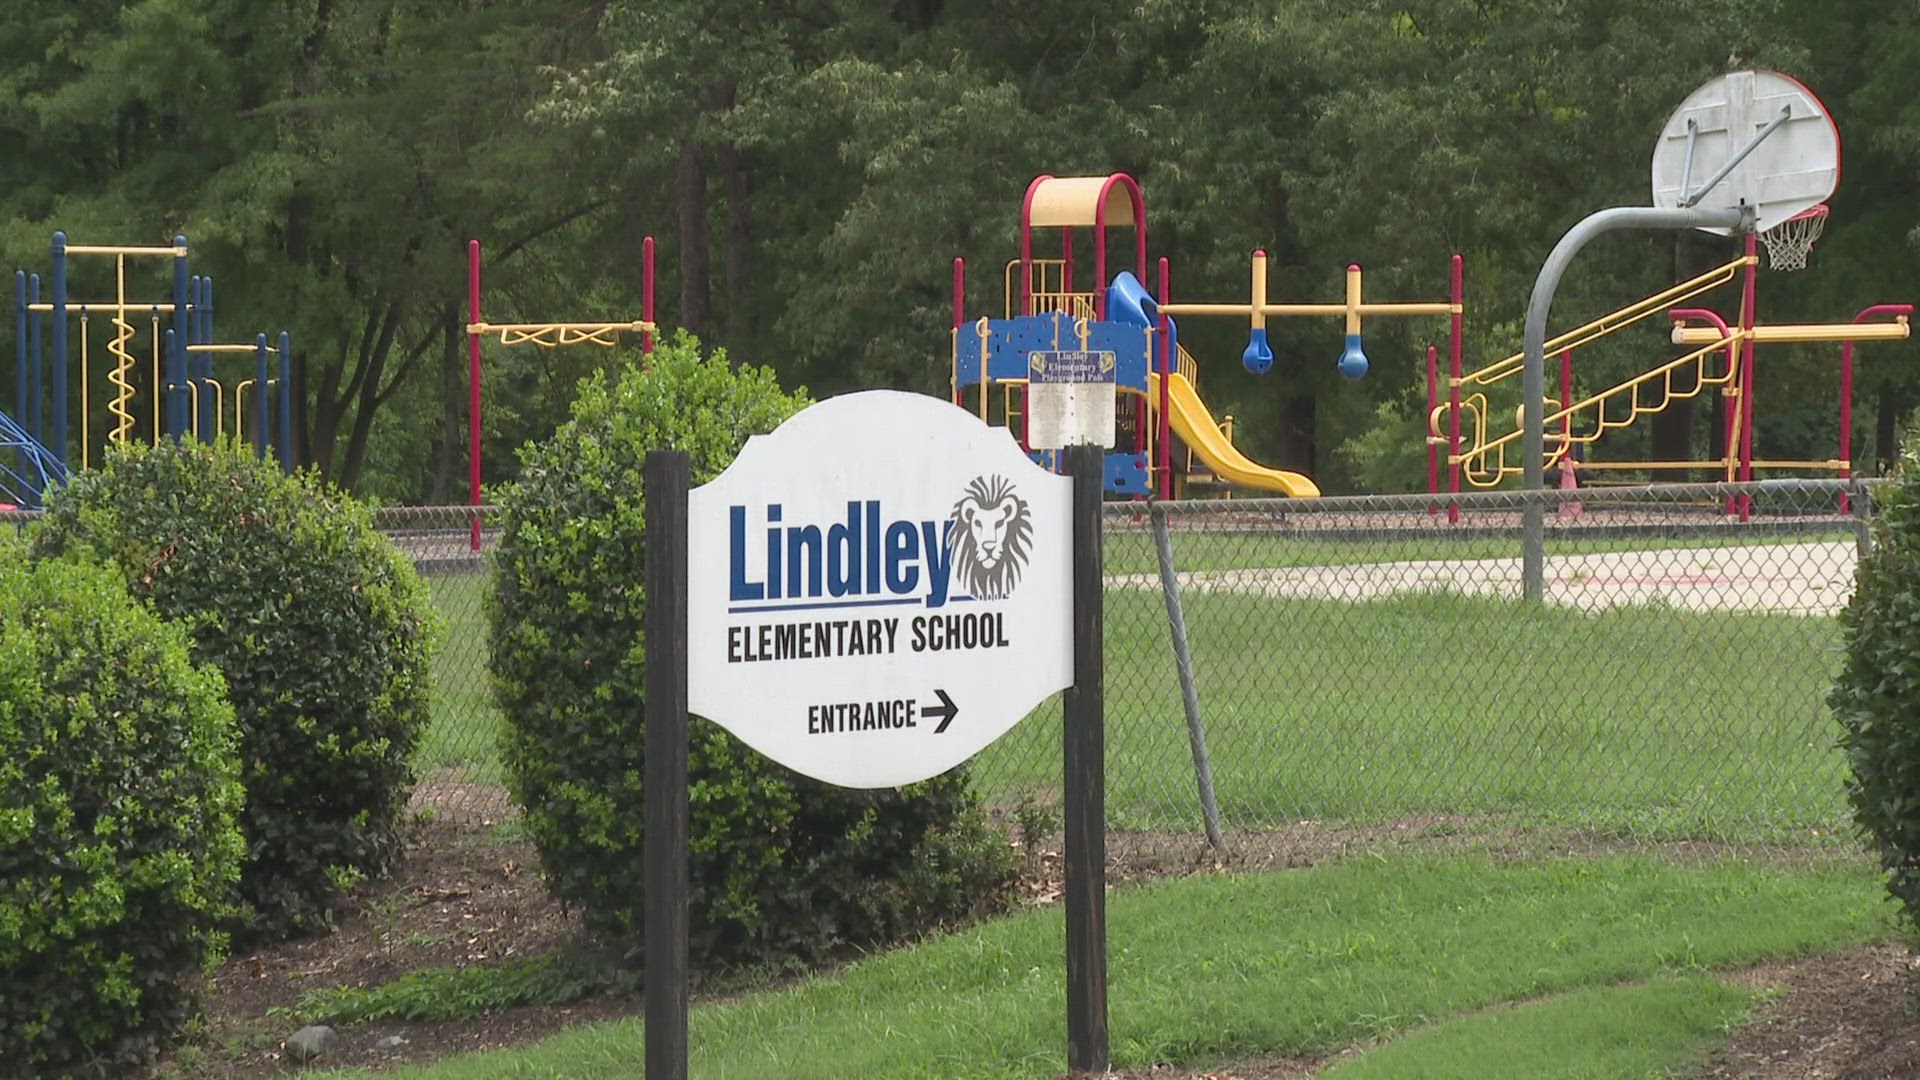 GCS is expected to vote on if they rebuild or renovate Lindley Elementary School.